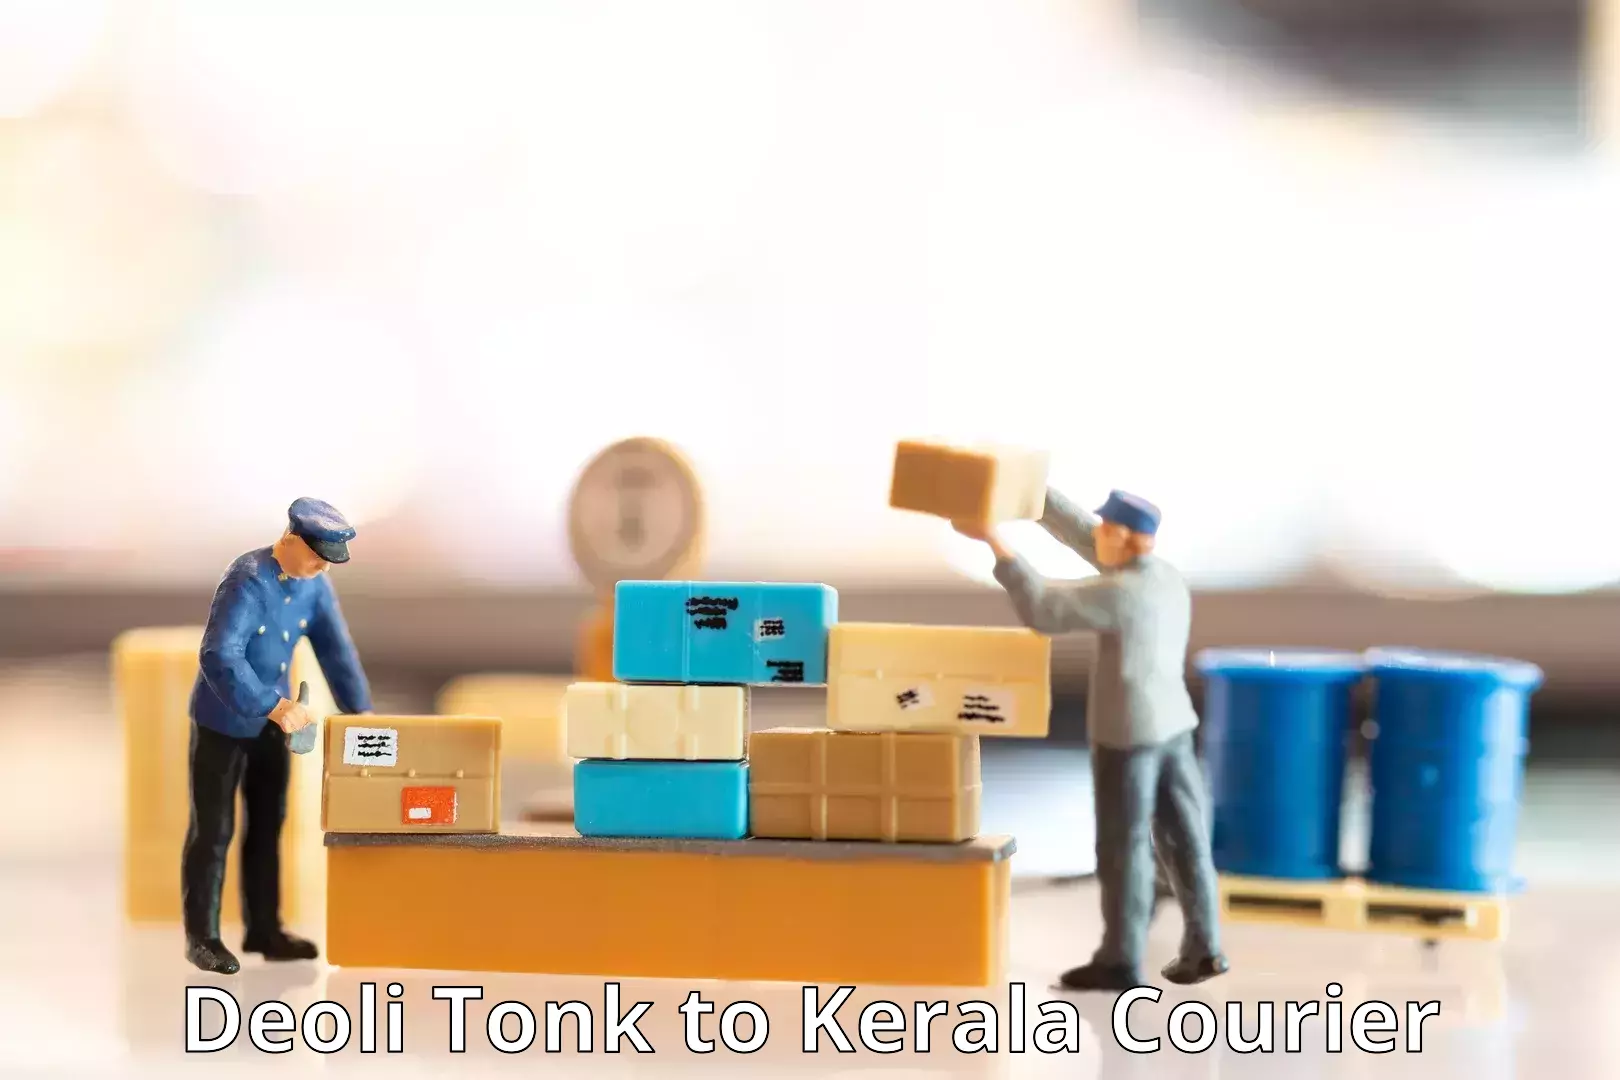 Business courier solutions Deoli Tonk to Kochi